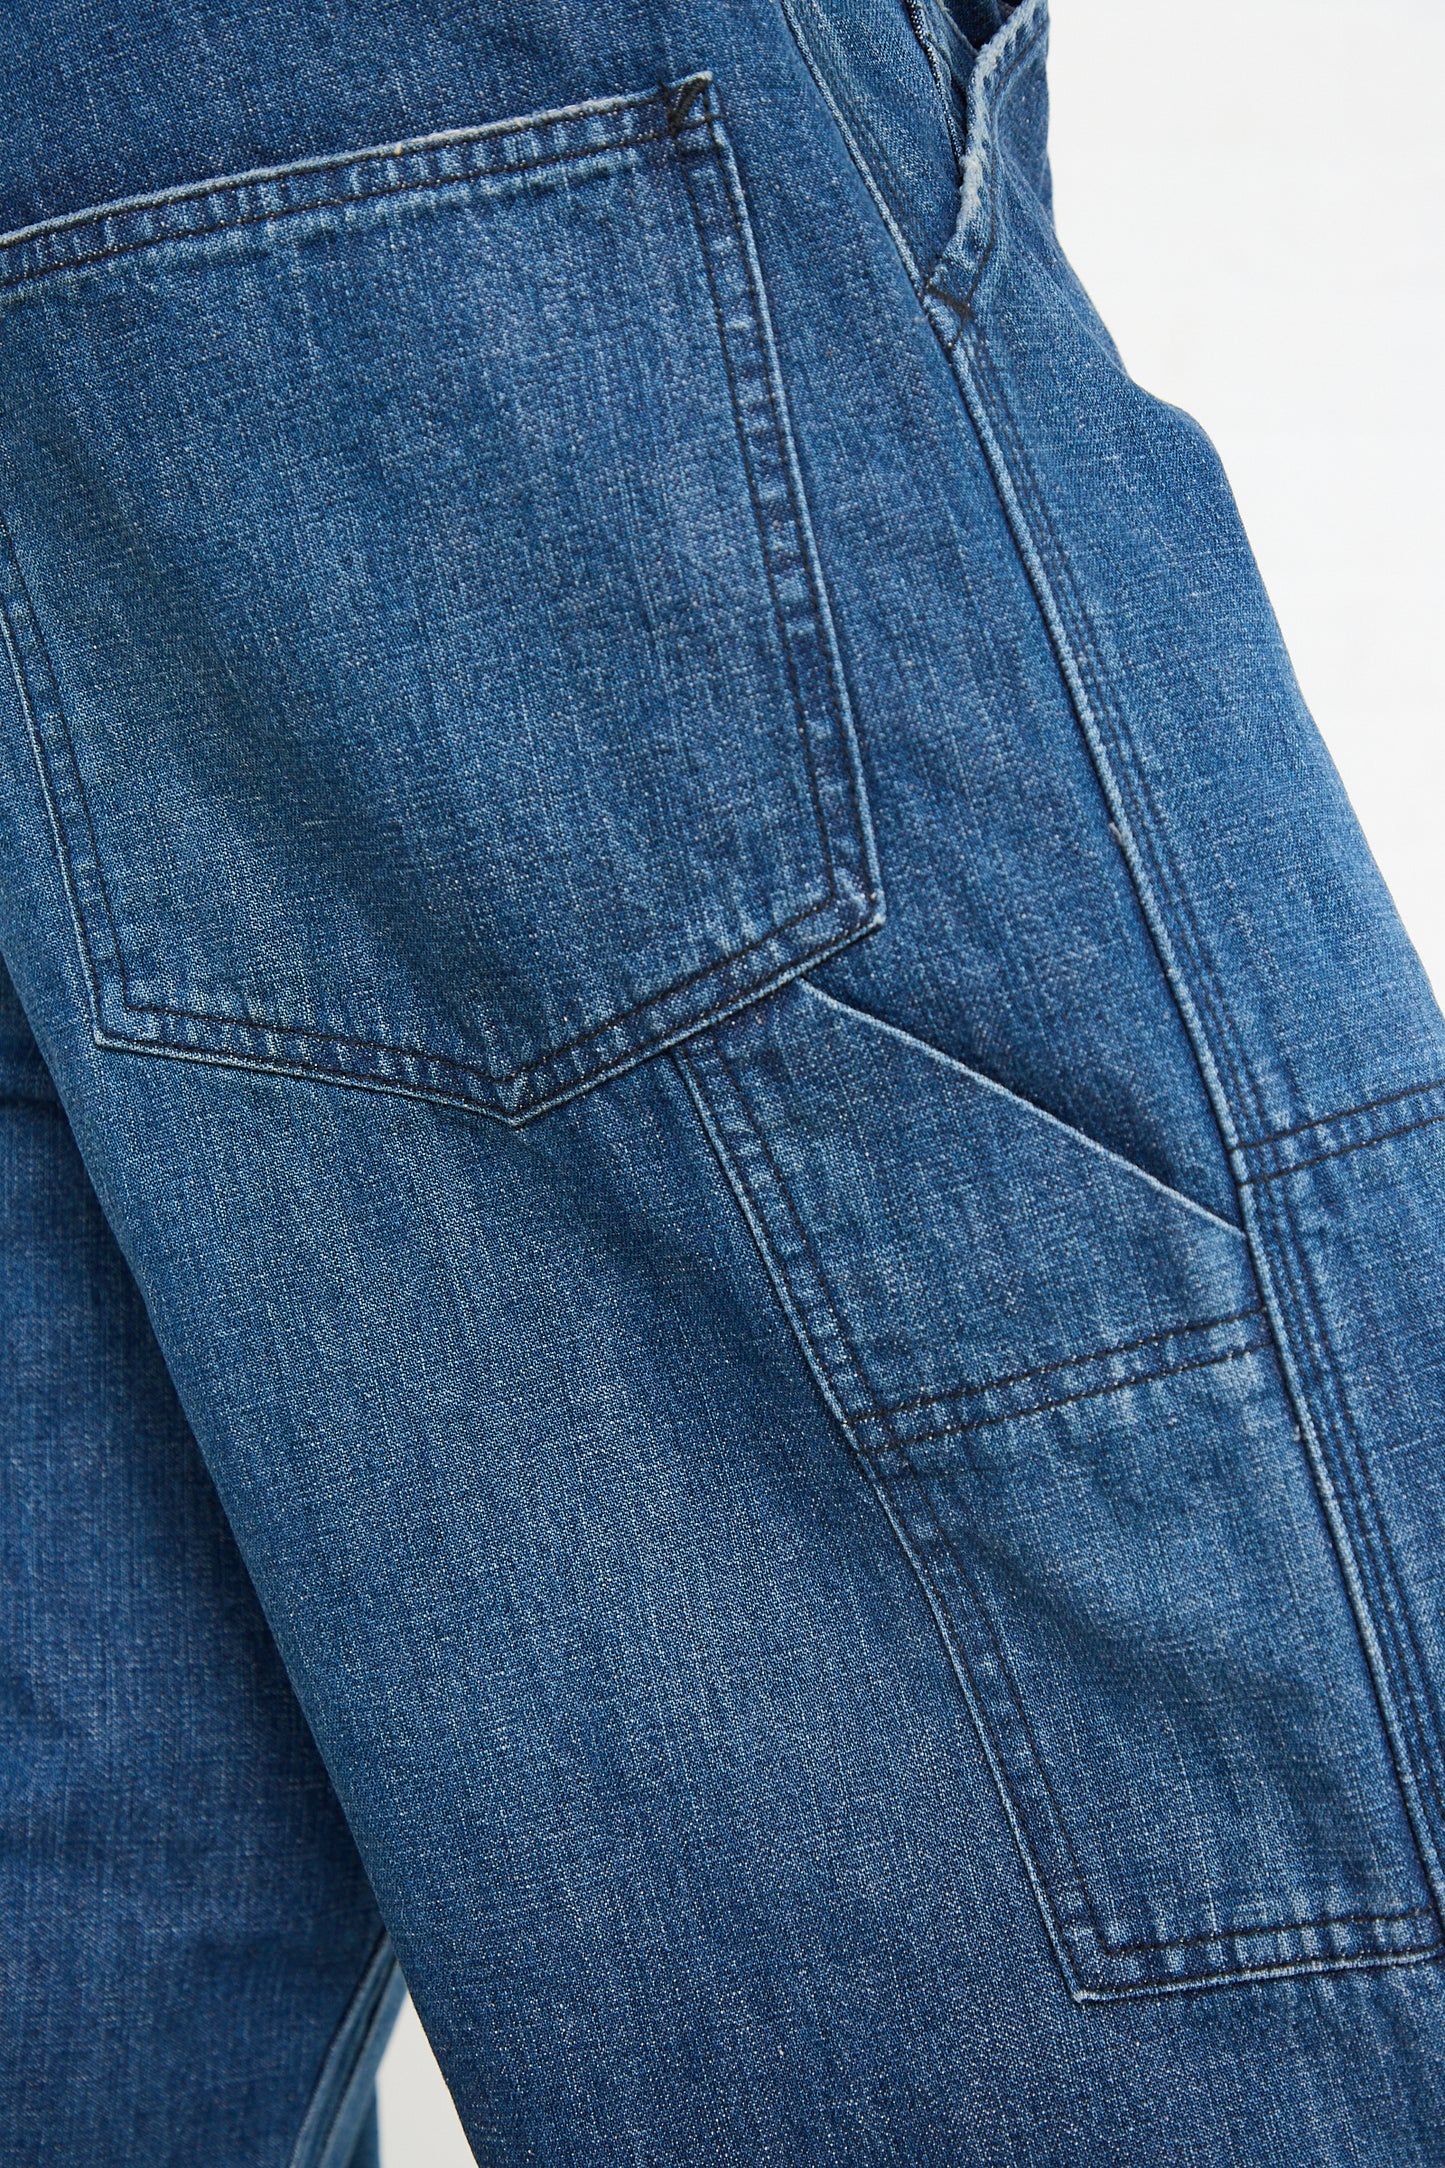 Close-up of the back pocket and seam of blue Denim Double Knee Work Pant in Indigo jeans crafted by Chimala's Japanese denim artisans.